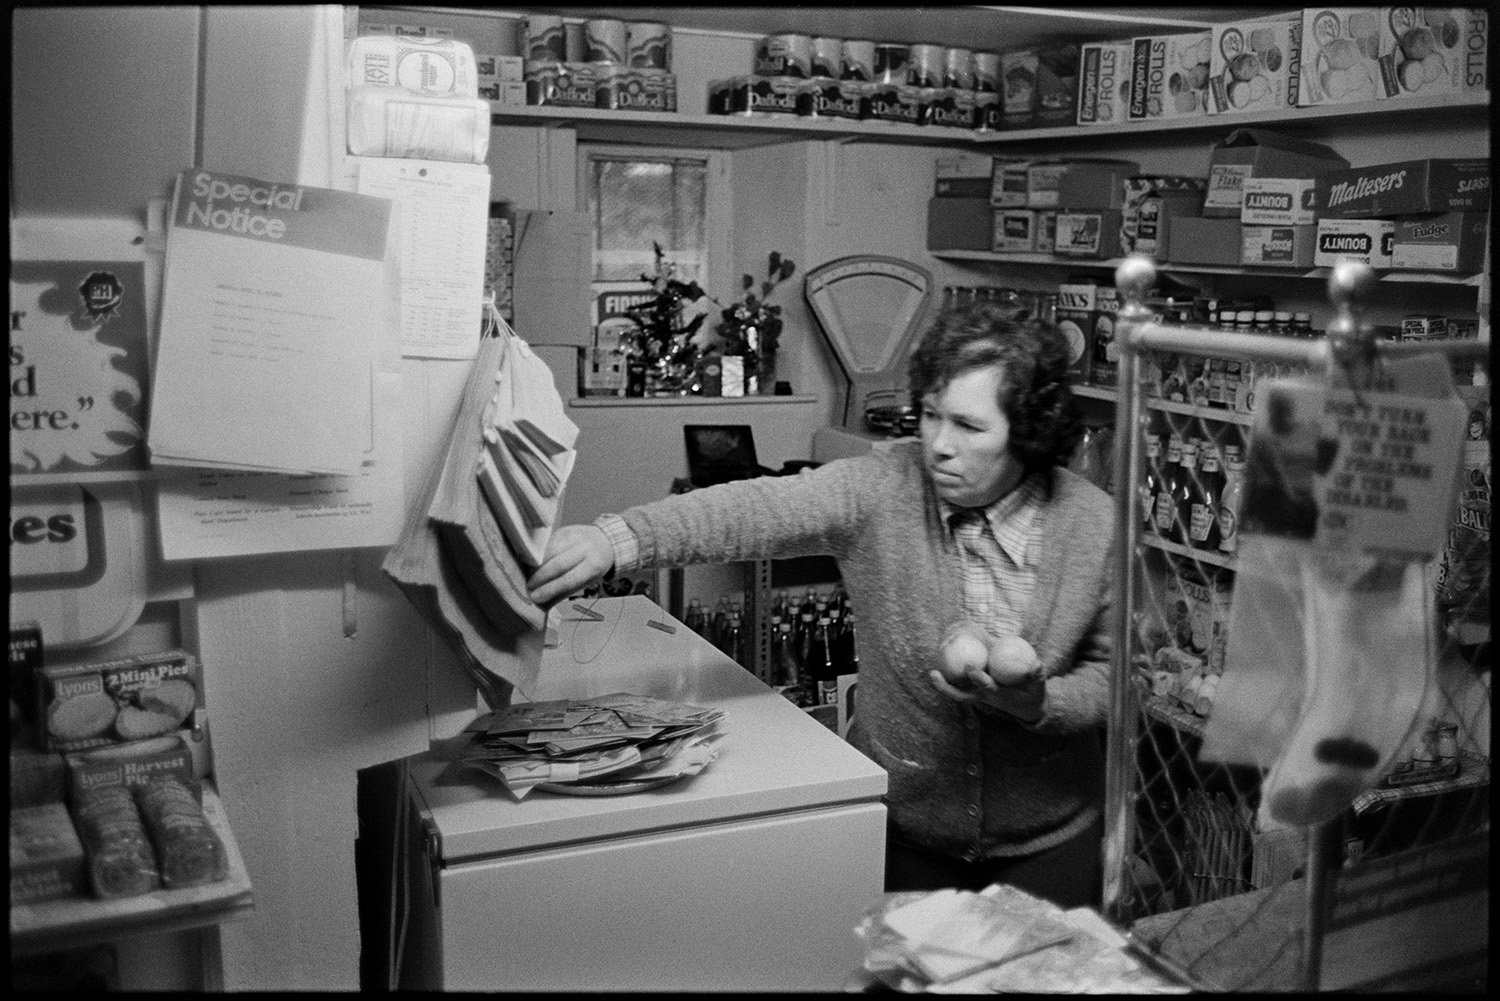 Interior, counter, Post Office Stores with woman serving customer behind old grill. 
[Enid Stentiford behind the counter of Monkokehampton Post Office. She is holding some apples which she is about to place in a paper bag. Various goods are on display on the shelves including, pies, tomato sauce and boxes of chocolate bars.]